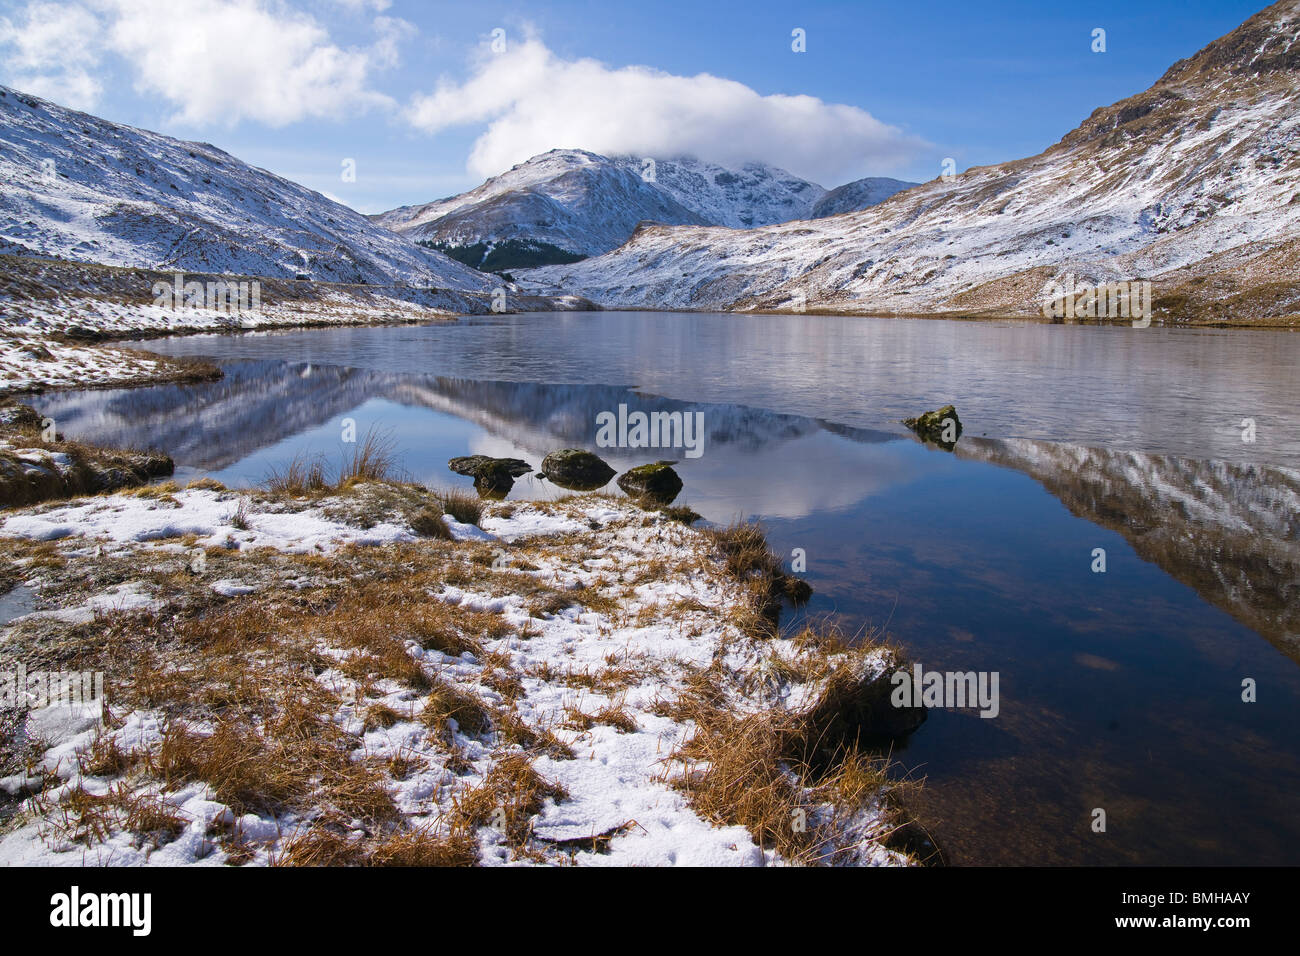 Snow  and ice, Loch Restil, Rest and be thankful, Arrochar, Argyll, Scotland Stock Photo